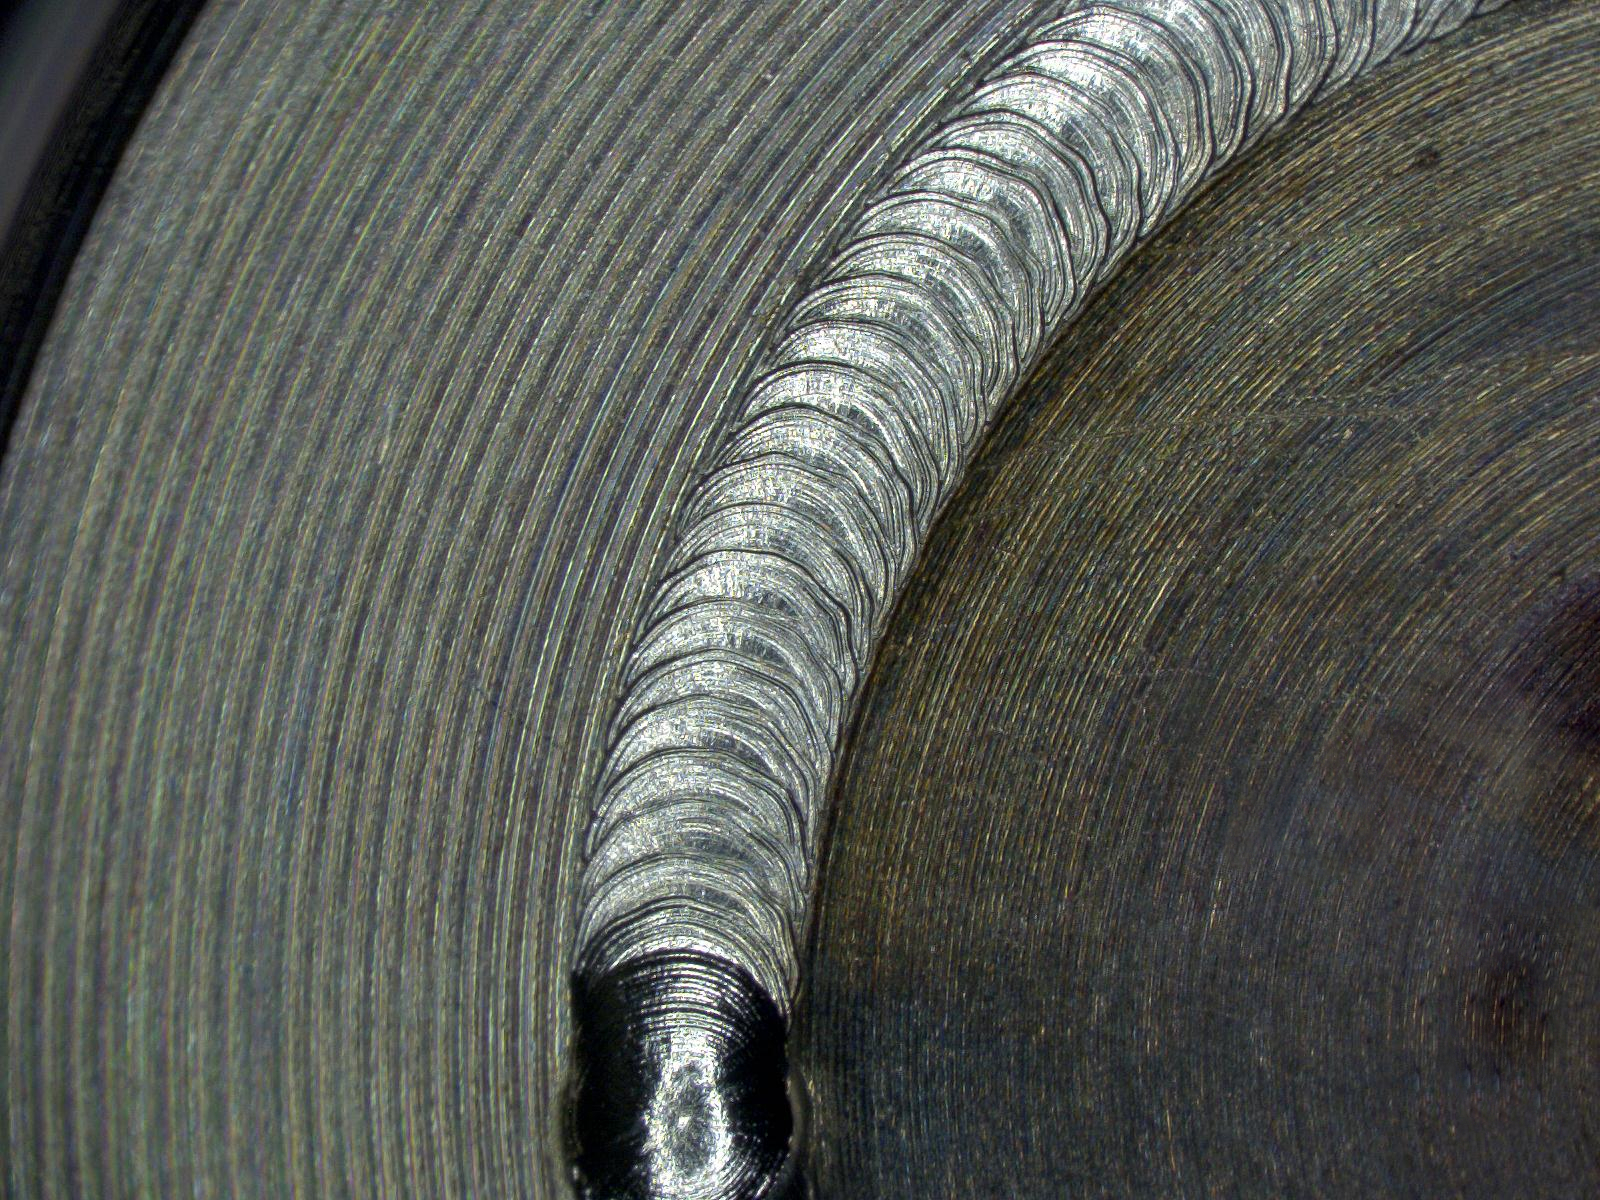 Microscope image of the weld from the pressure sensor